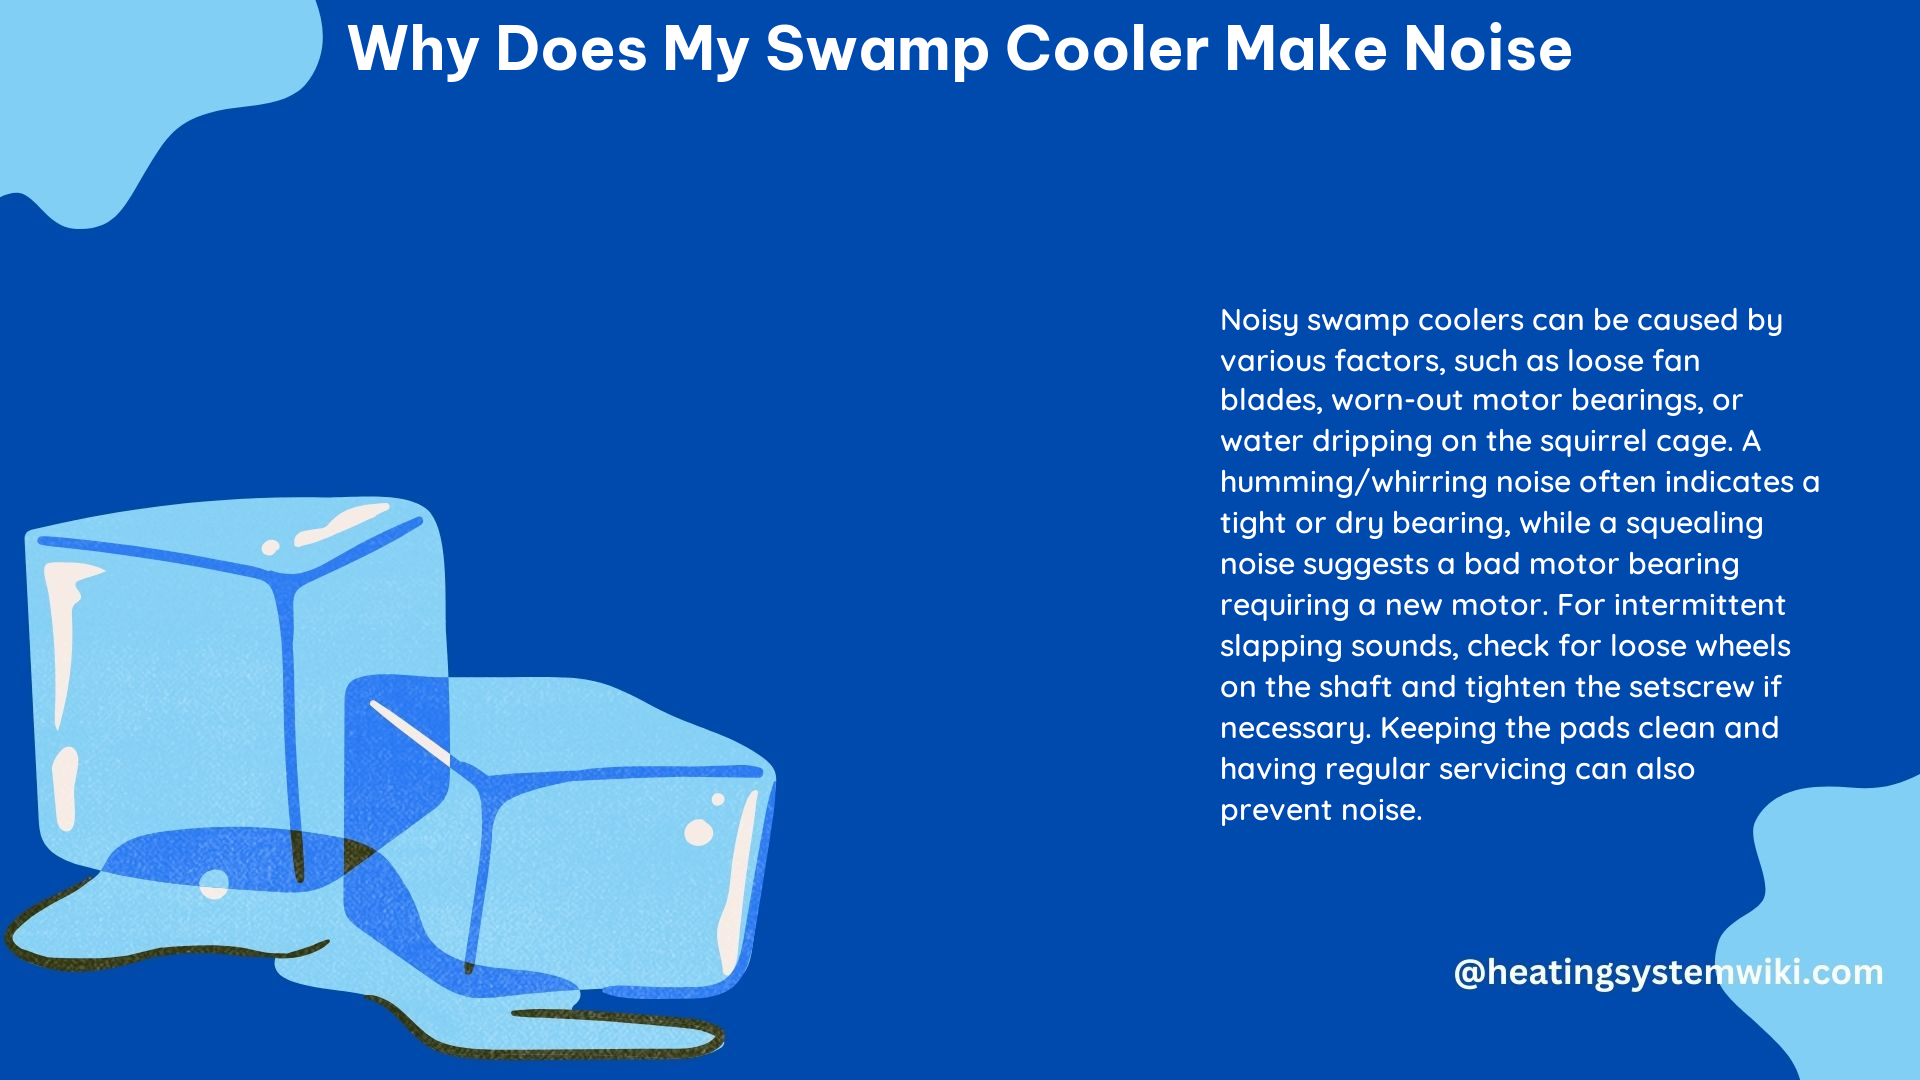 Why Does My Swamp Cooler Make Noise